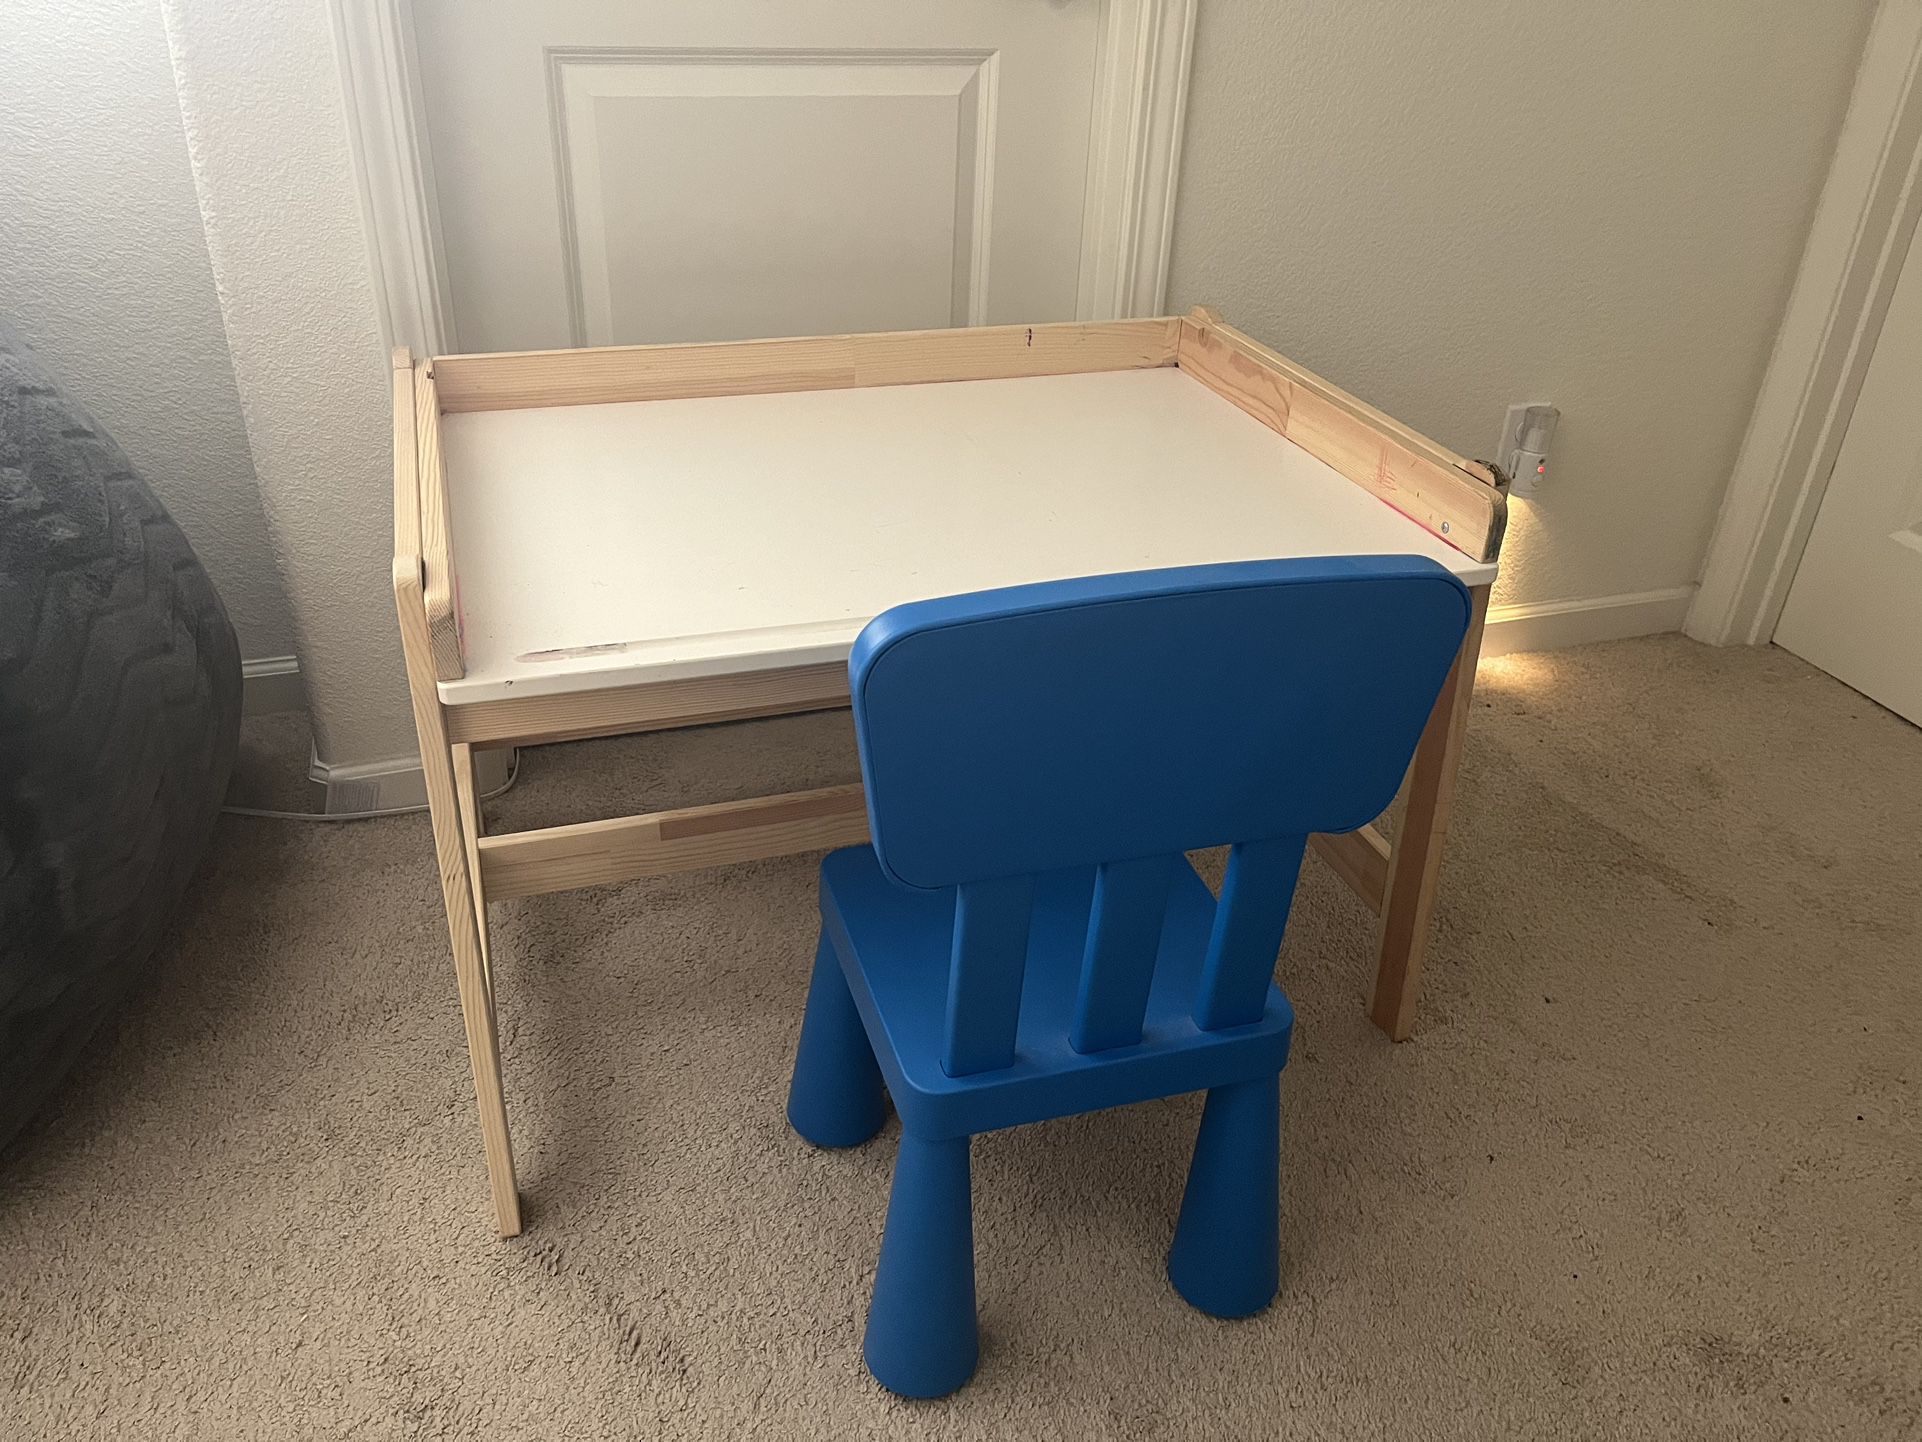 Children’s IKEA desk and chair